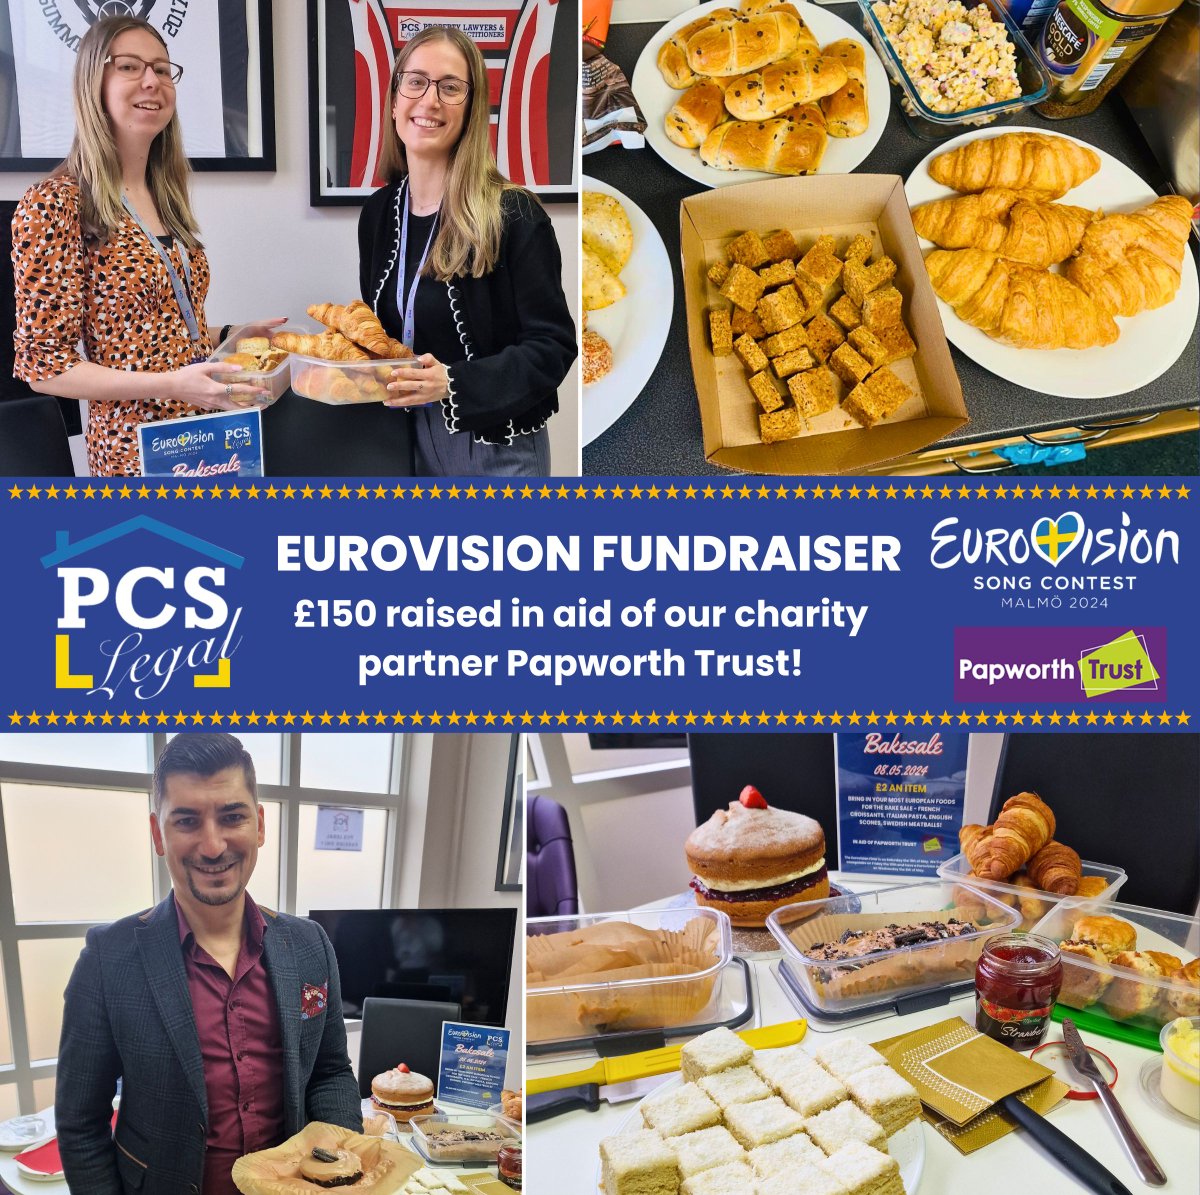 To celebrate the Eurovision final in Sweden, today we've been wearing blue and yellow, and held a sweepstake and European bake sale to fundraise for @Papworth_Trust! 🇸🇪 🥐 We've raised £150 for our charity partner 💸